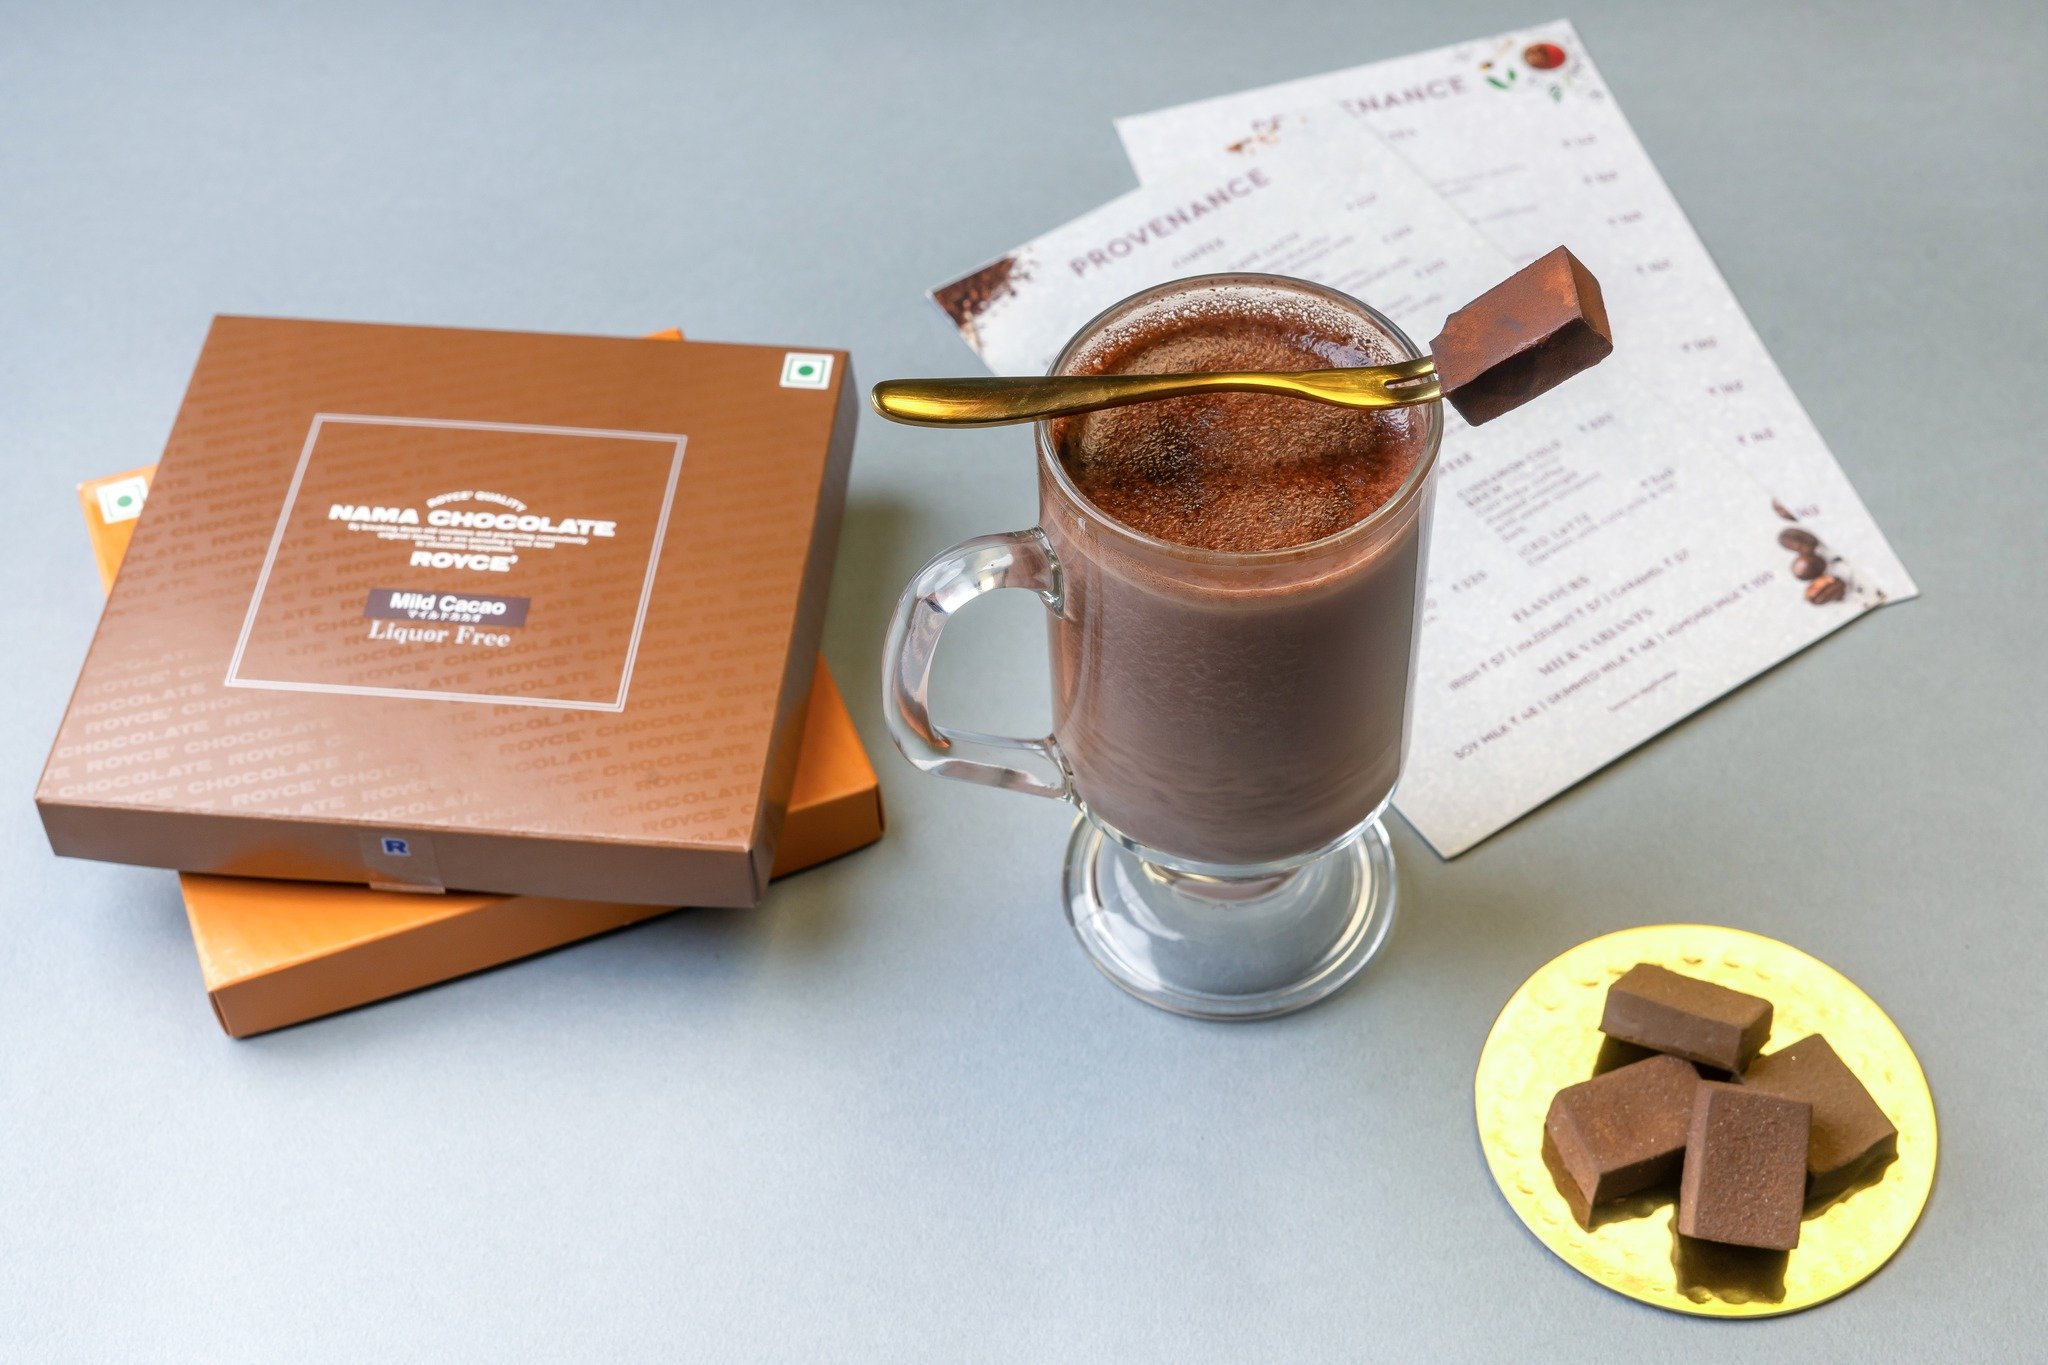 🍫✨ Exciting News! ✨🍫

Indulge in the rich flavors of our new Hot Chocolate Menu at Provenance Gourmet Gifts! Featuring some of the best sellers from our chocolate vault, including:

☕️ ROYCE' Nama x Provenance Mocha
☕️ Dolfin Chocolate x Provenance